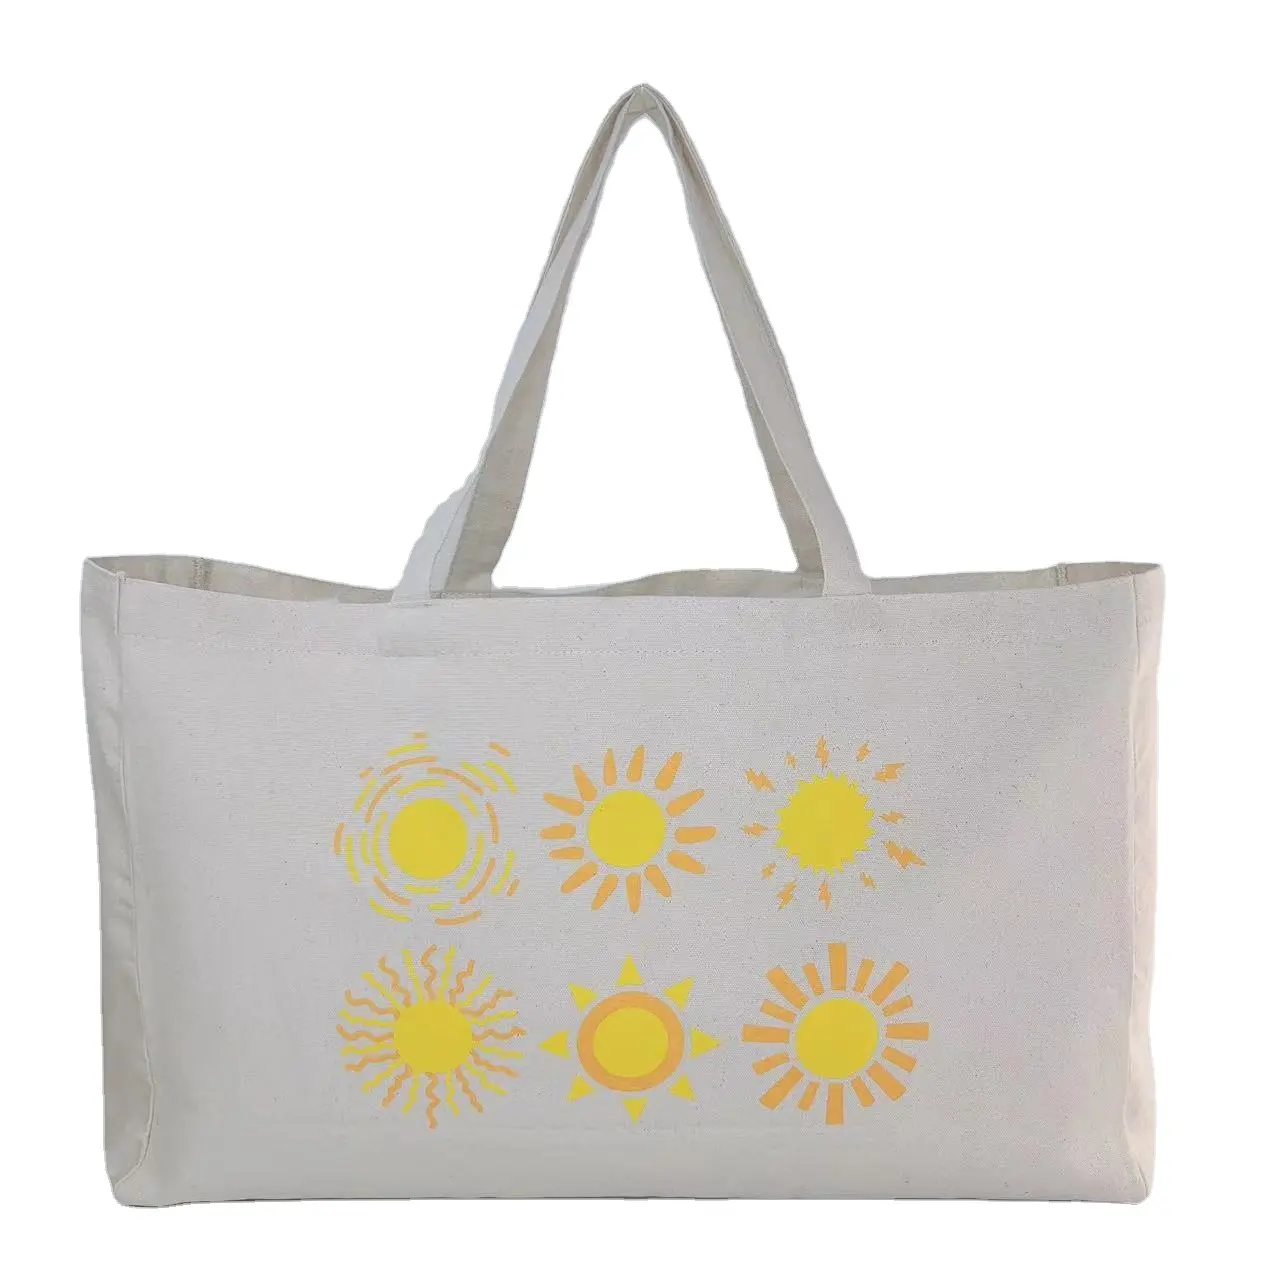 Customized Eco-Friendly Canvas Tote Shopping Bags with Cotton Handle XL Organizer Bag with Custom Printed Logo